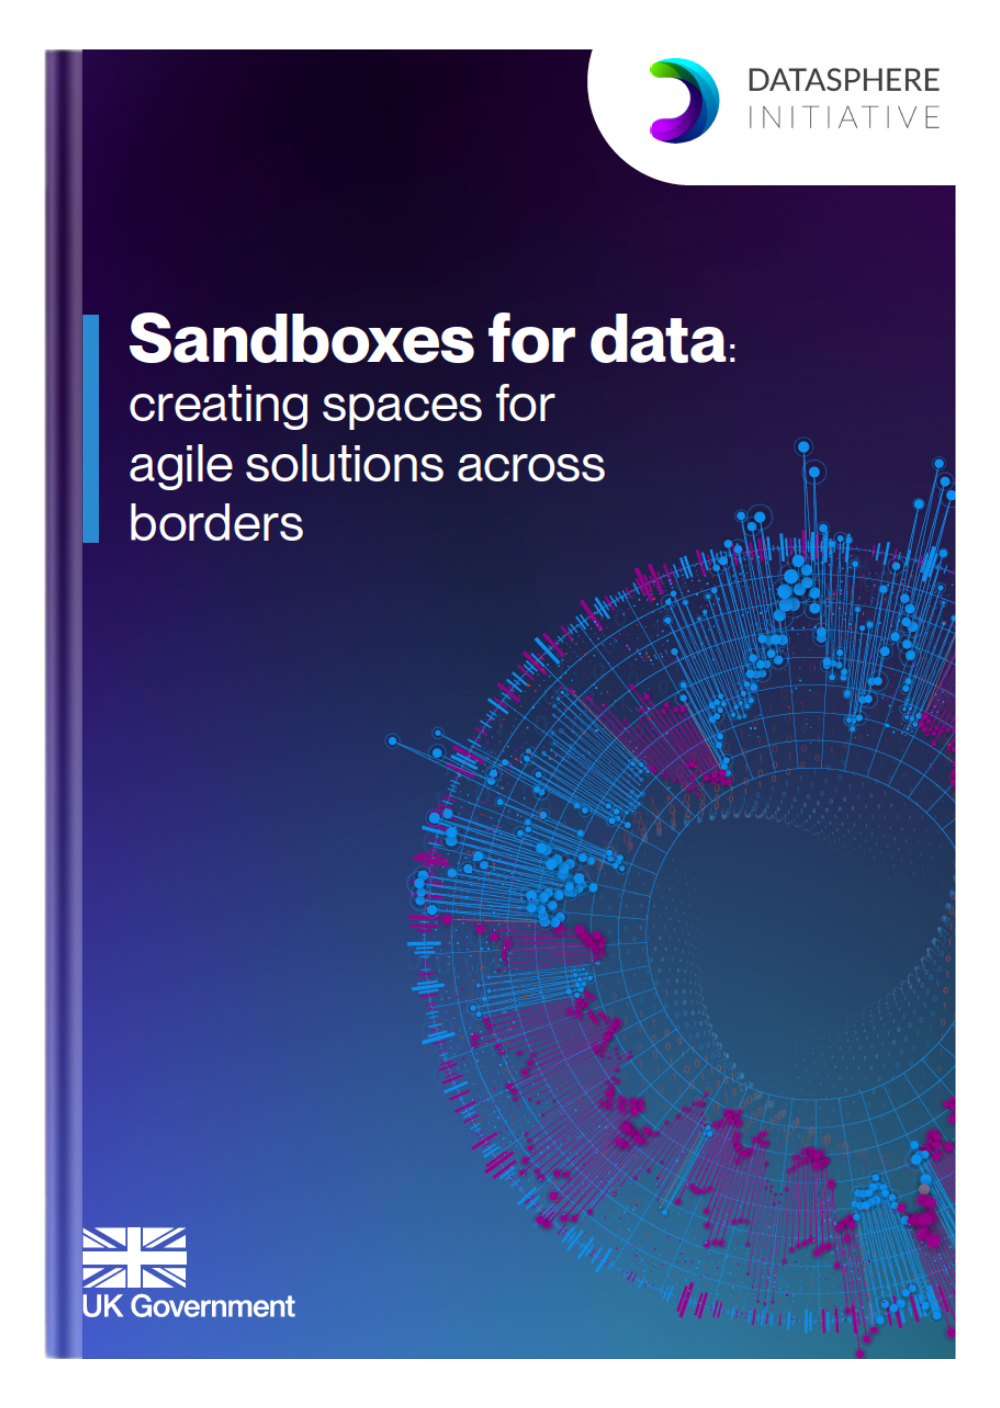 Sandboxes for data report